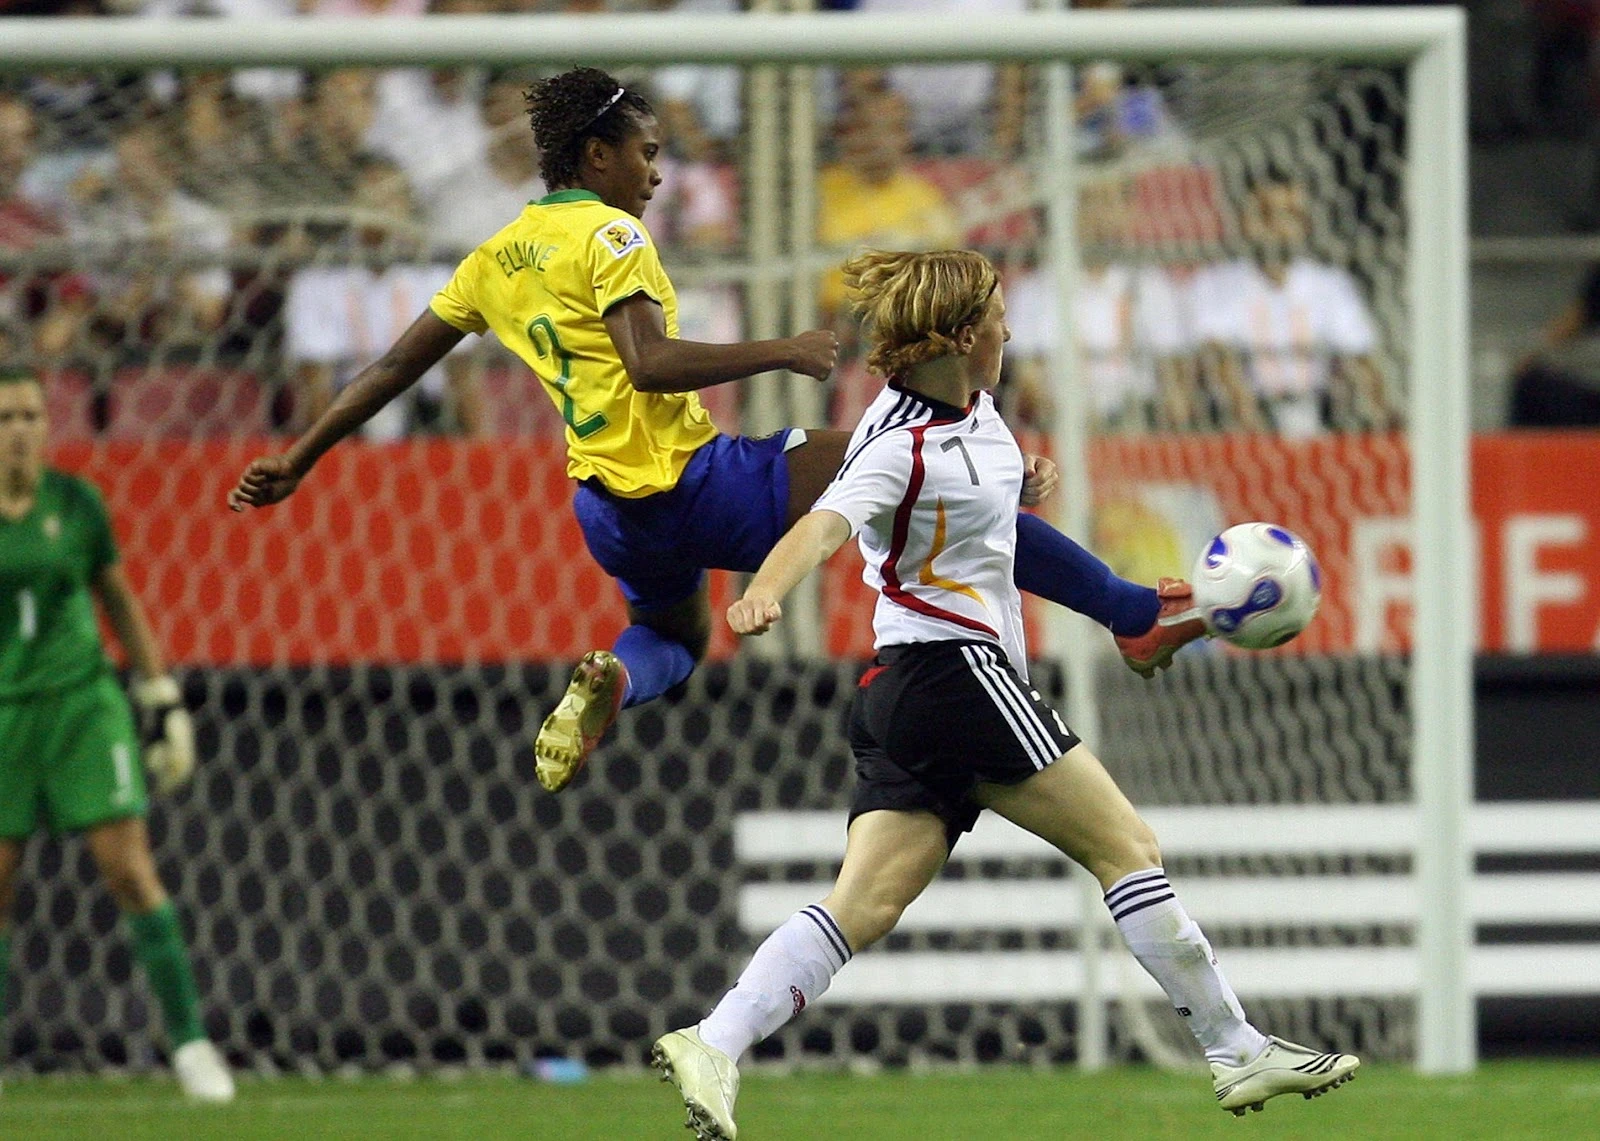 A player from Brazil blocking a shot during their final match against Germany in the FIFA Women's World Cup 2007.